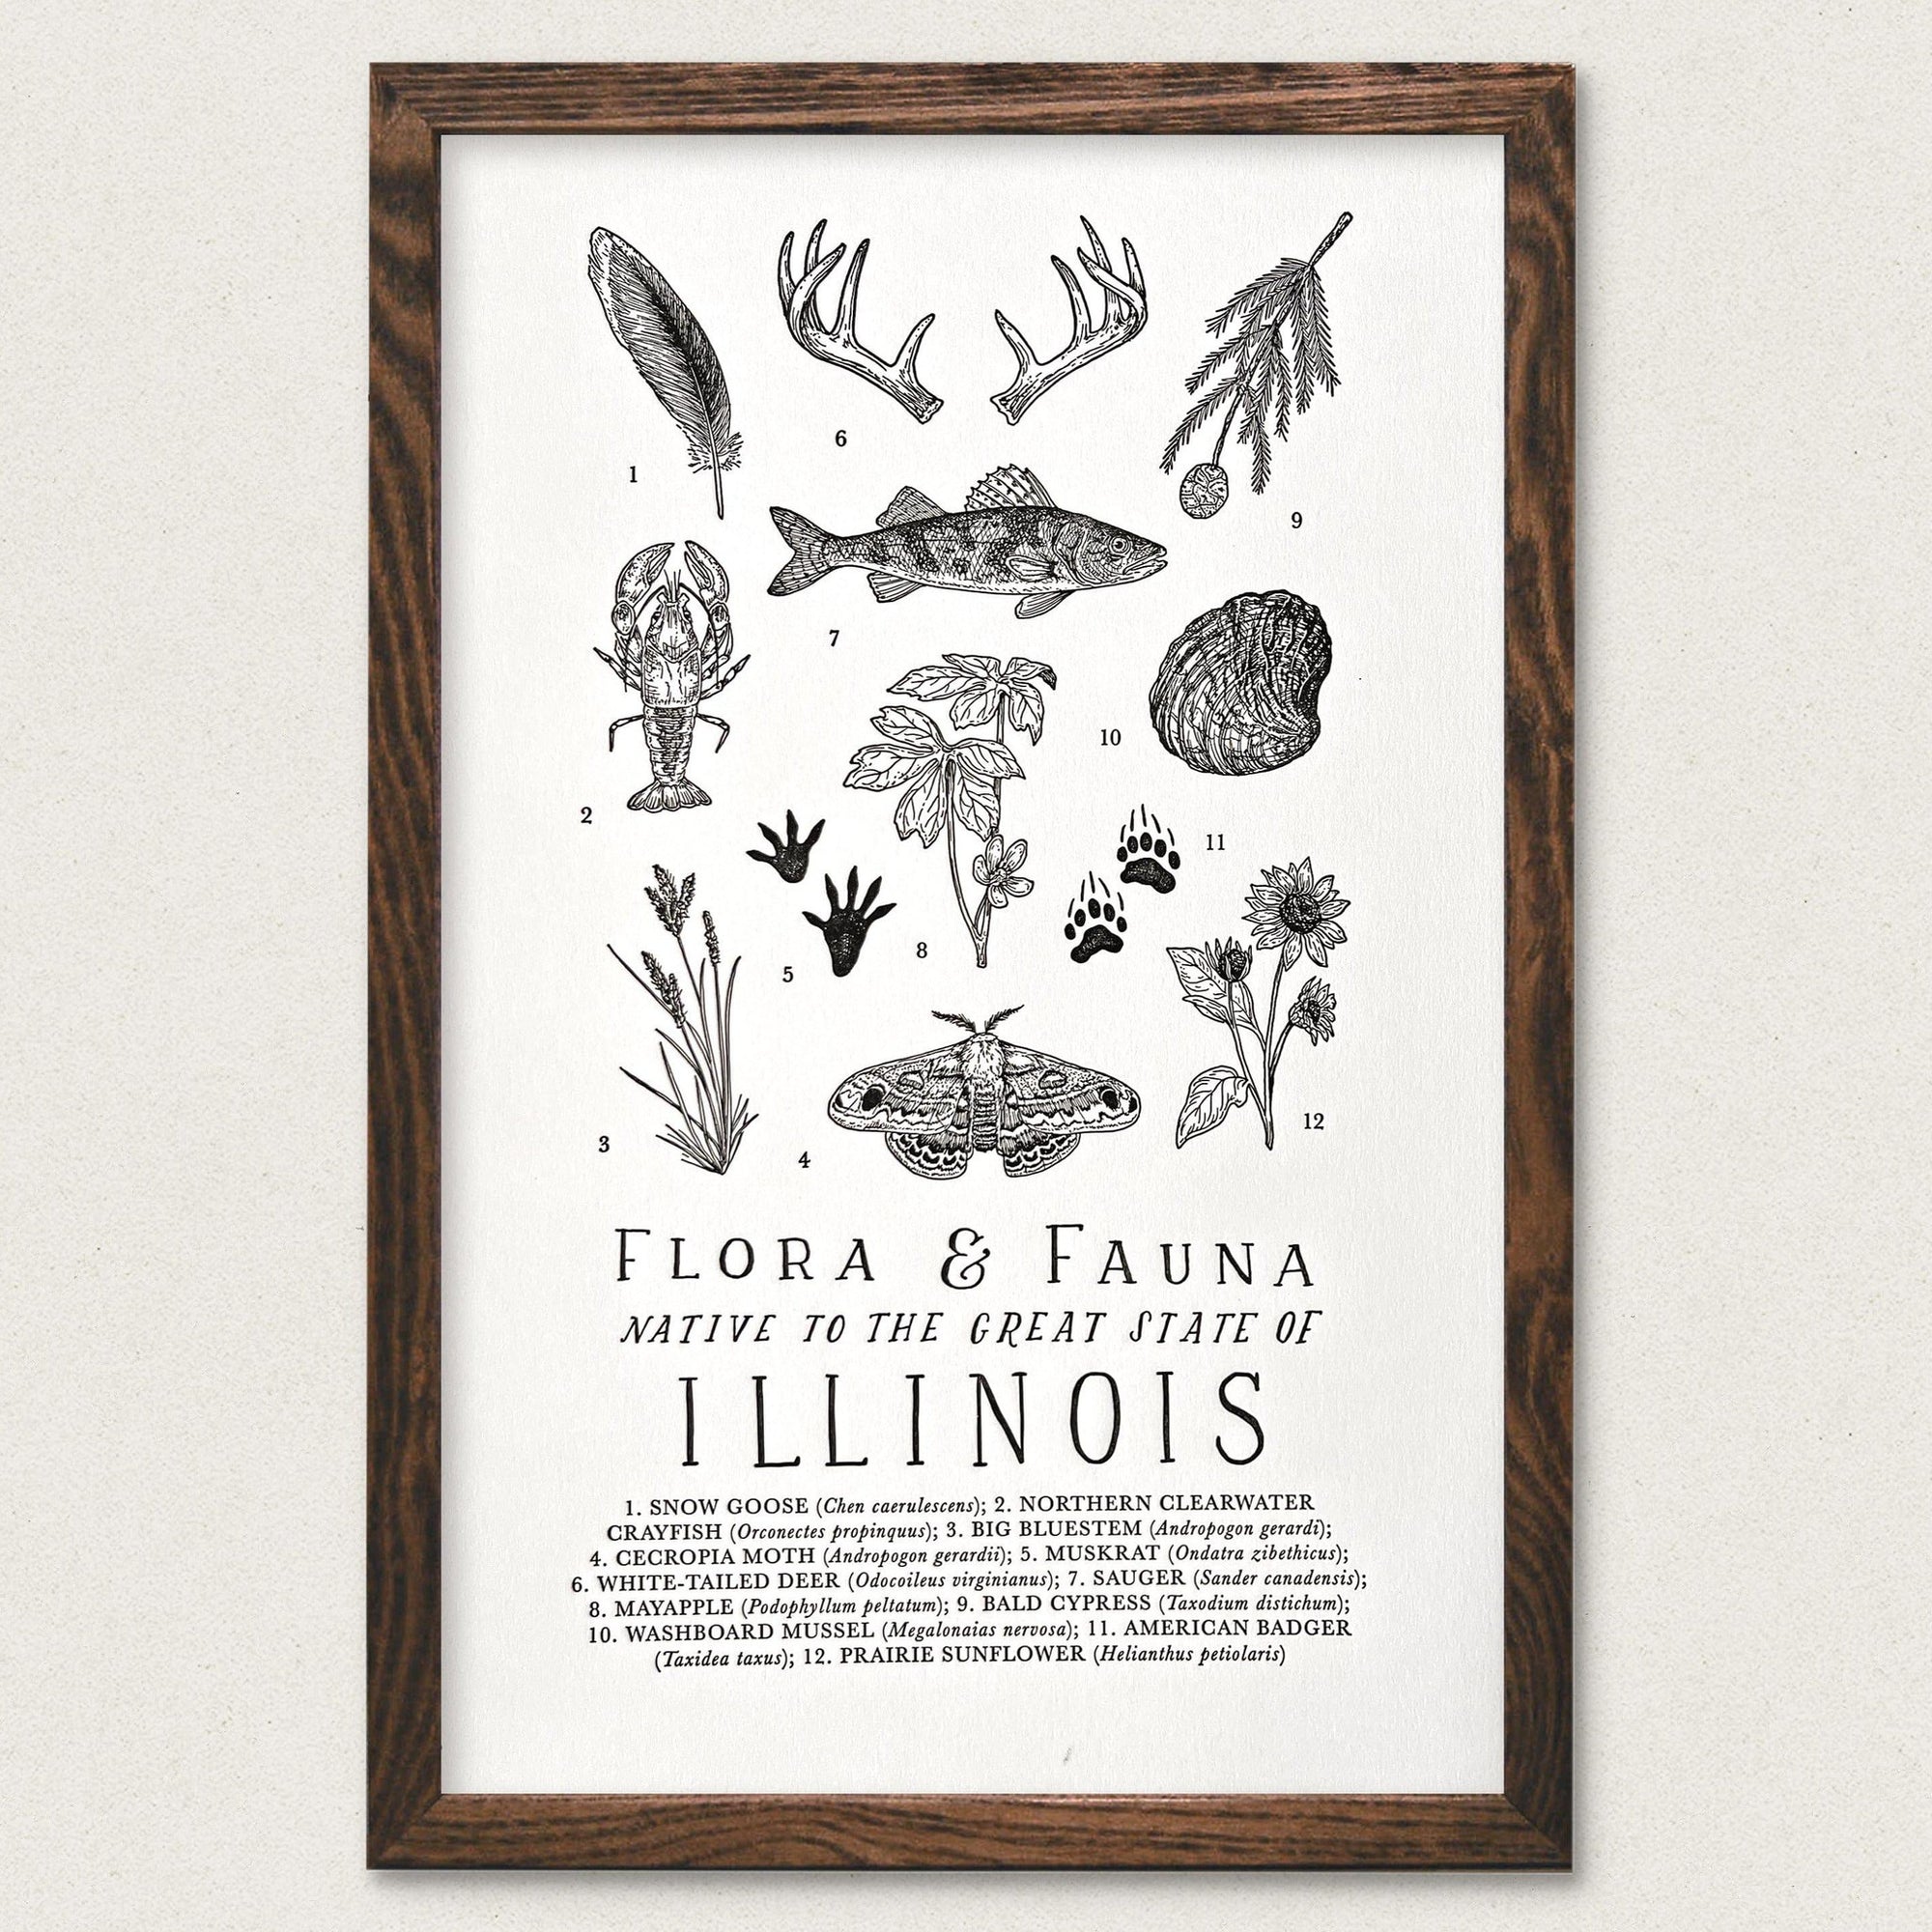 Illinois Field Guide Letterpress Print by The Wild Wander of various plants and aninmals.